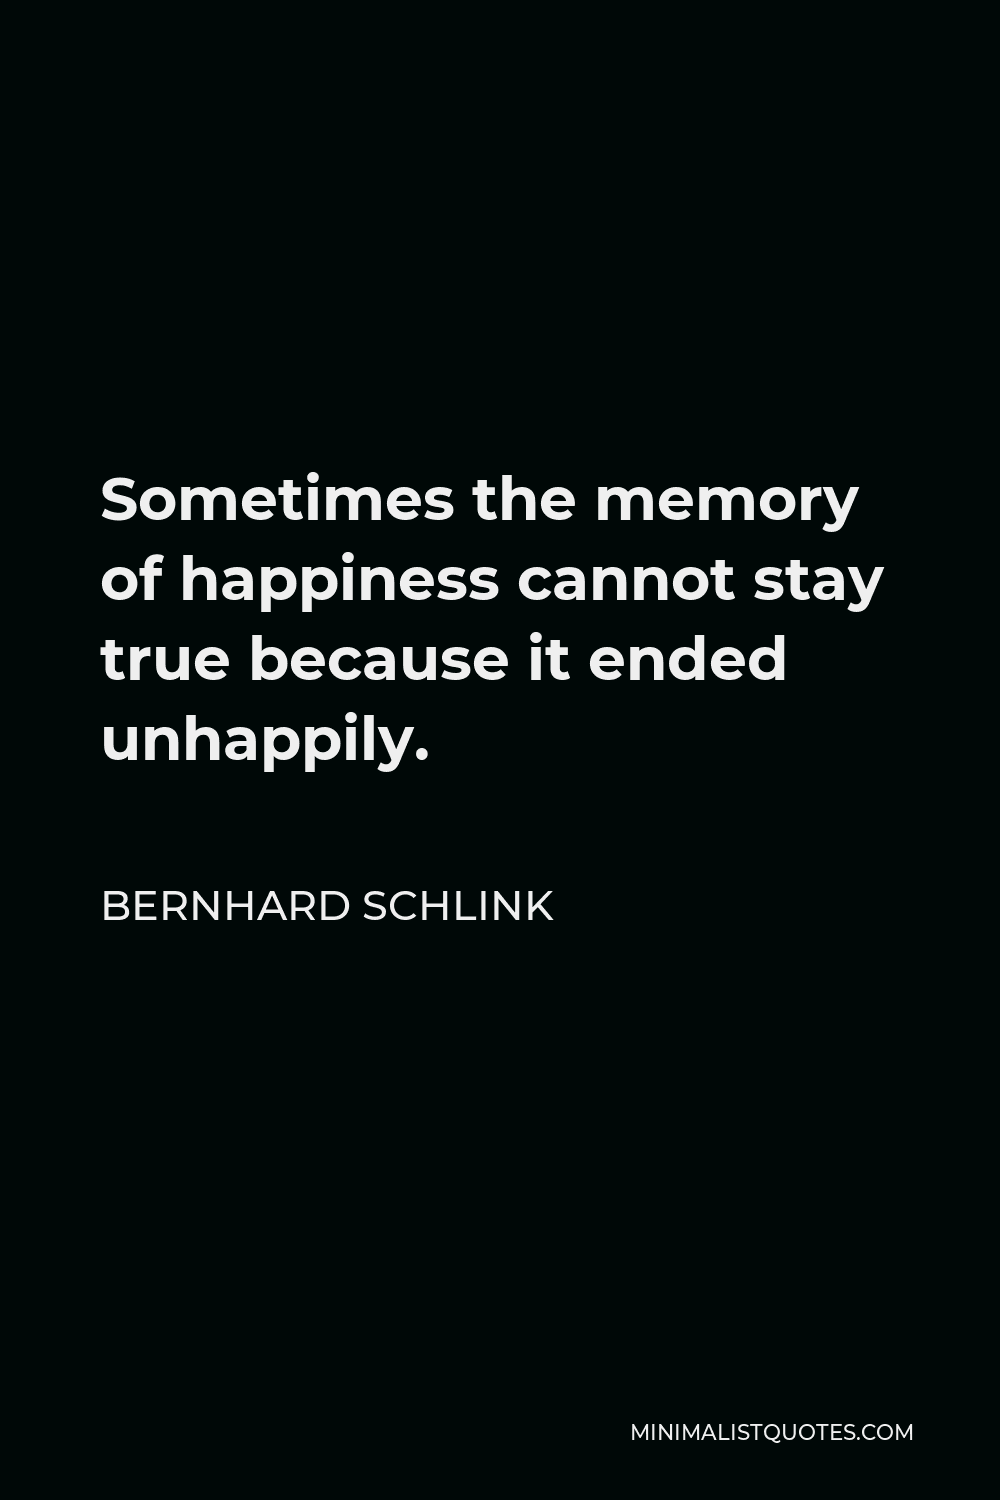 Bernhard Schlink Quote - Sometimes the memory of happiness cannot stay true because it ended unhappily.